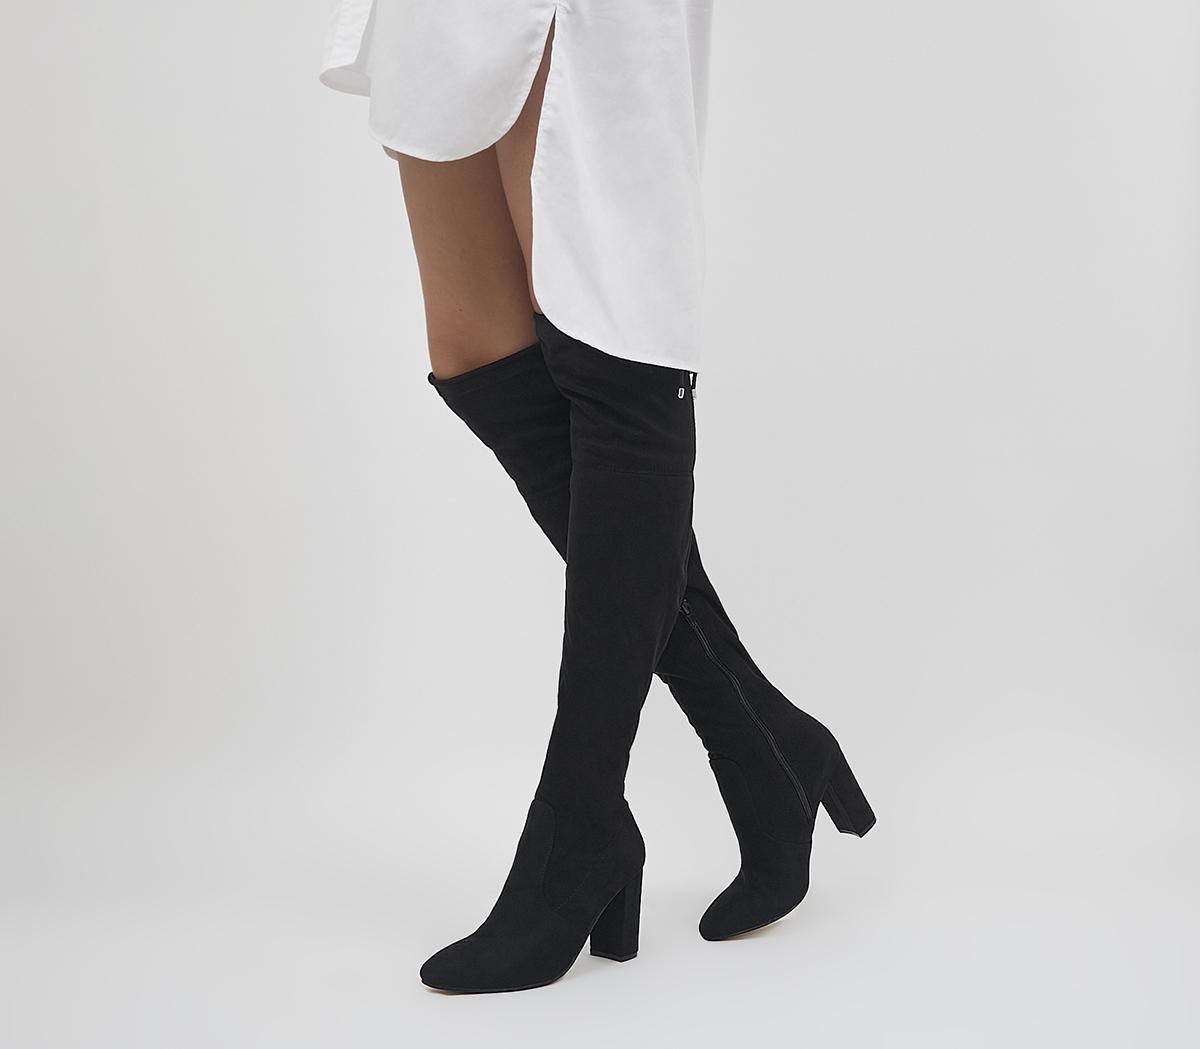 Office Katie Over The Knee Stretch Boots Black - Knee High Boots